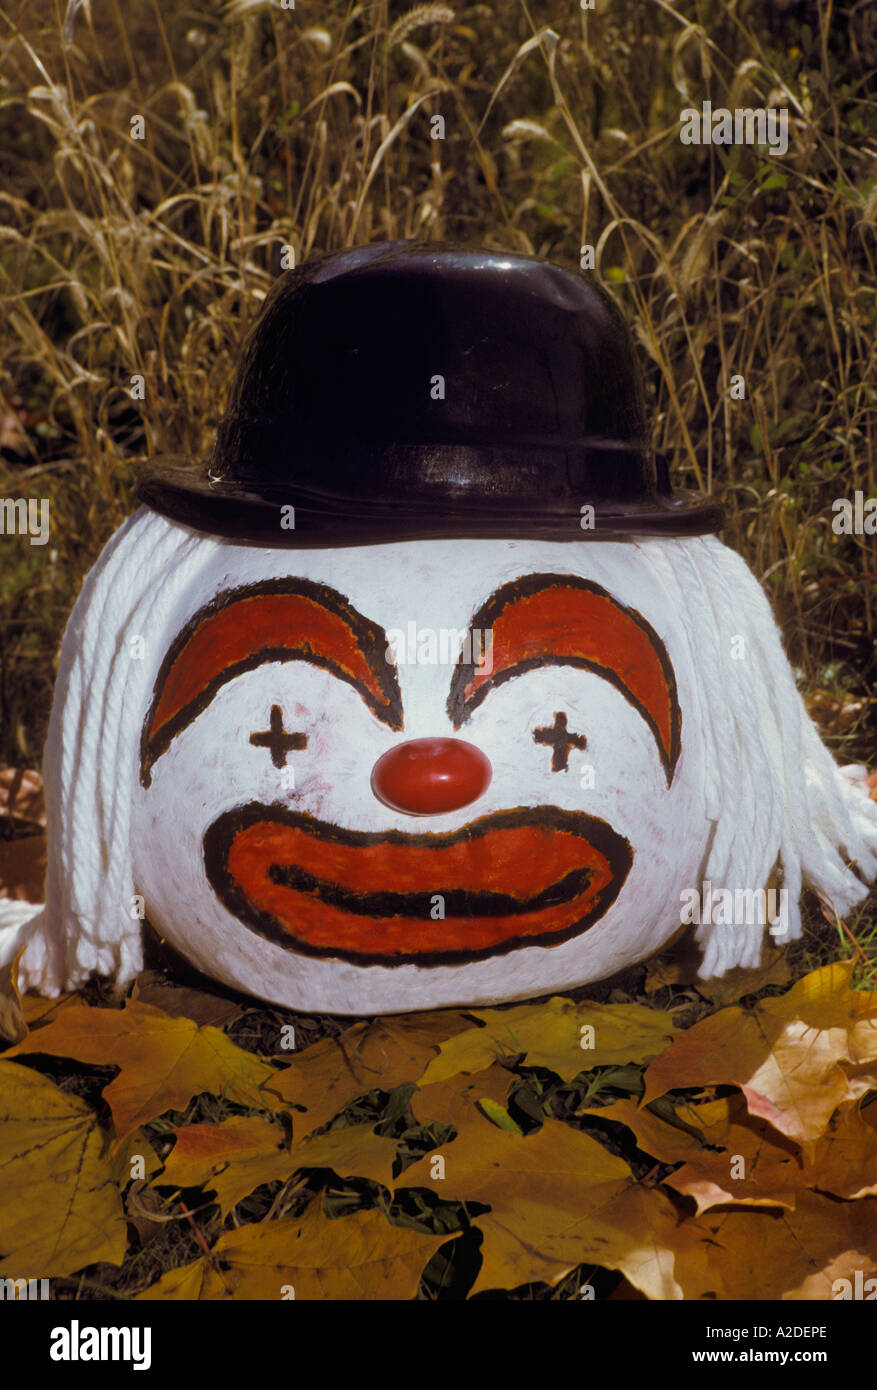 Clown painted pumpkin sitting on the ground. Stock Photo